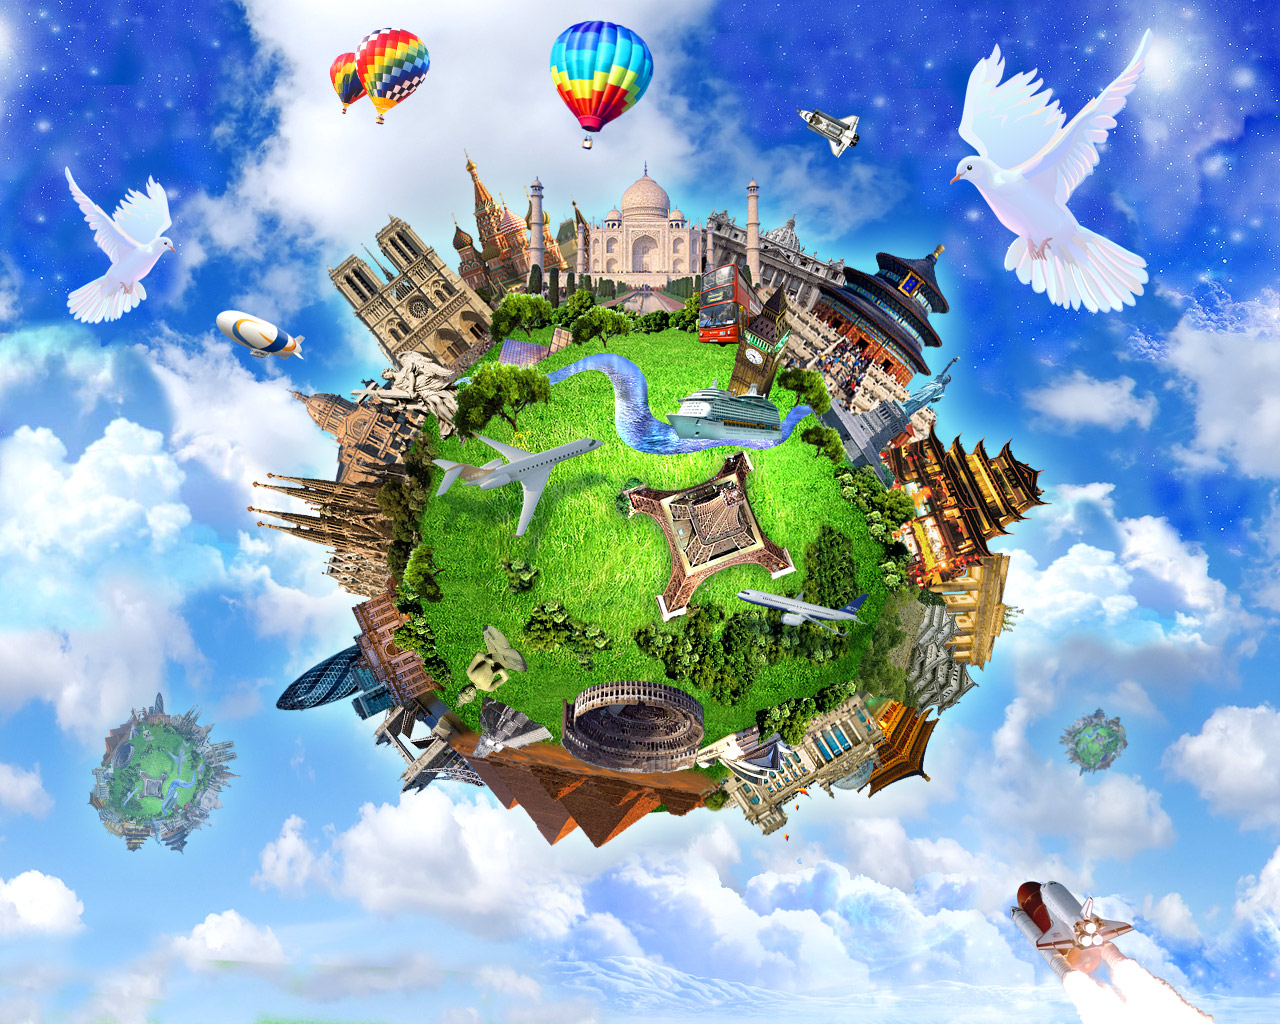 most creative wallpapers,world,strategy video game,sky,earth,illustration